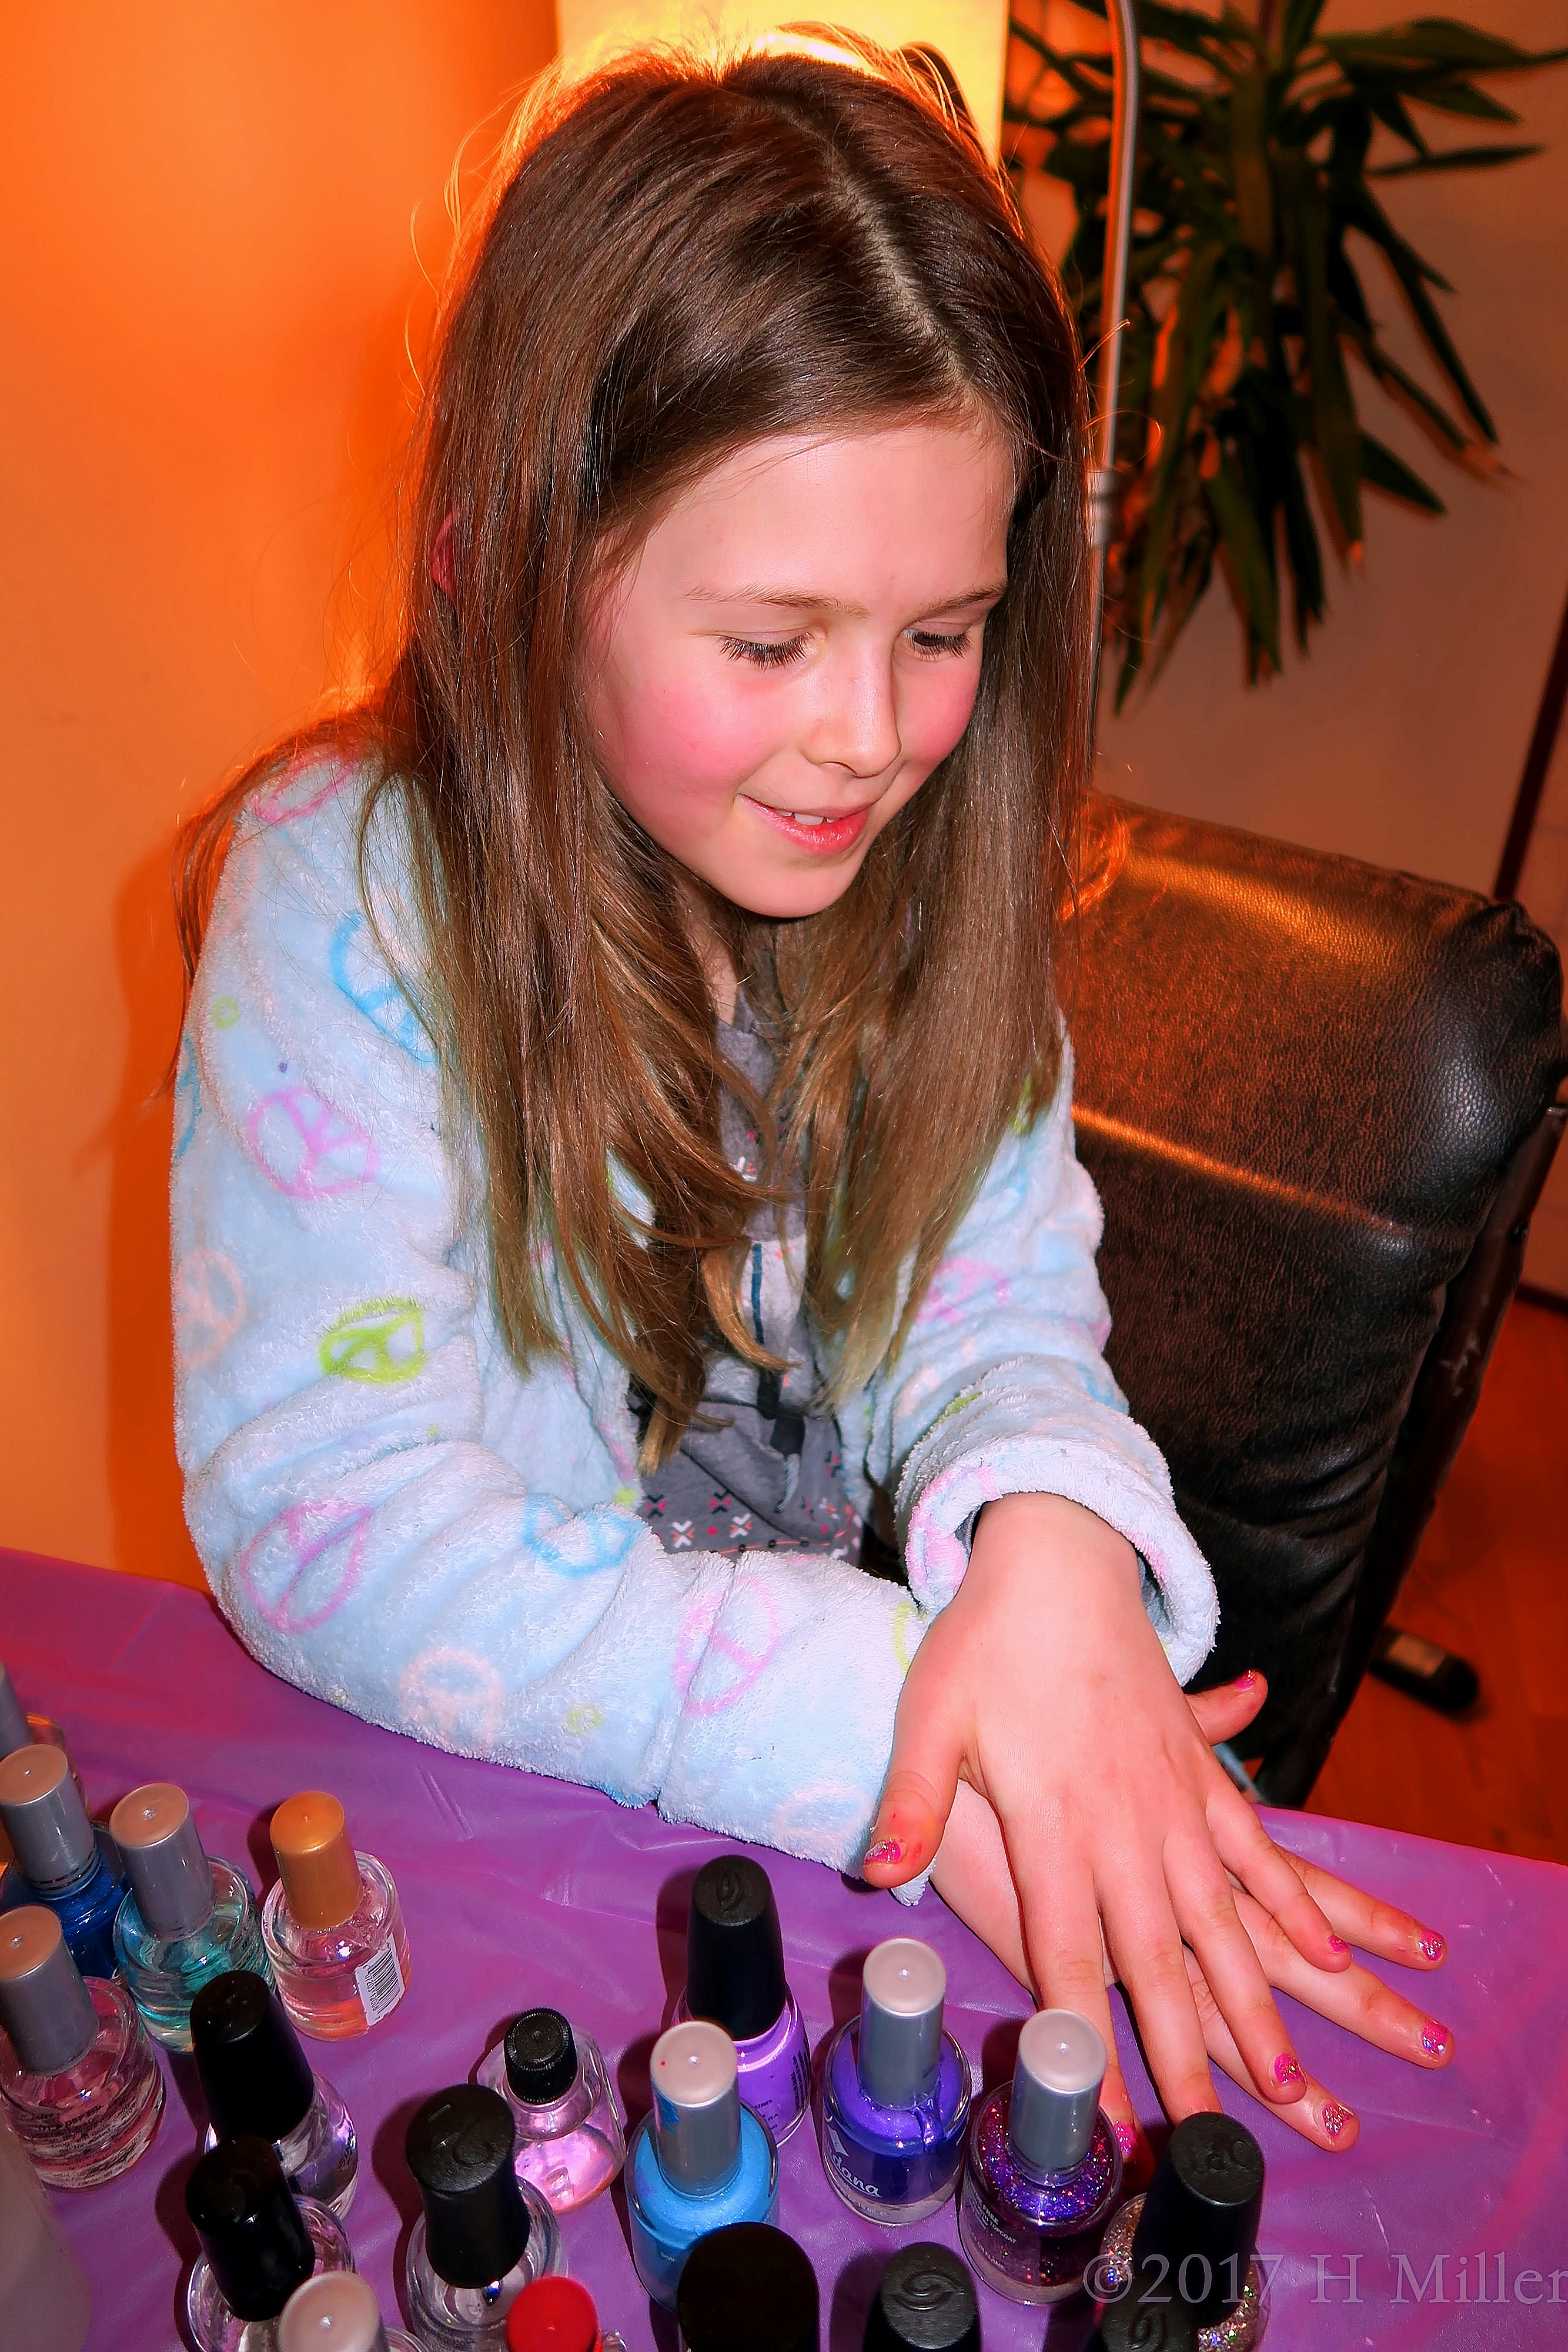 This Party Guest Getting Her Mini Mani Done! 4